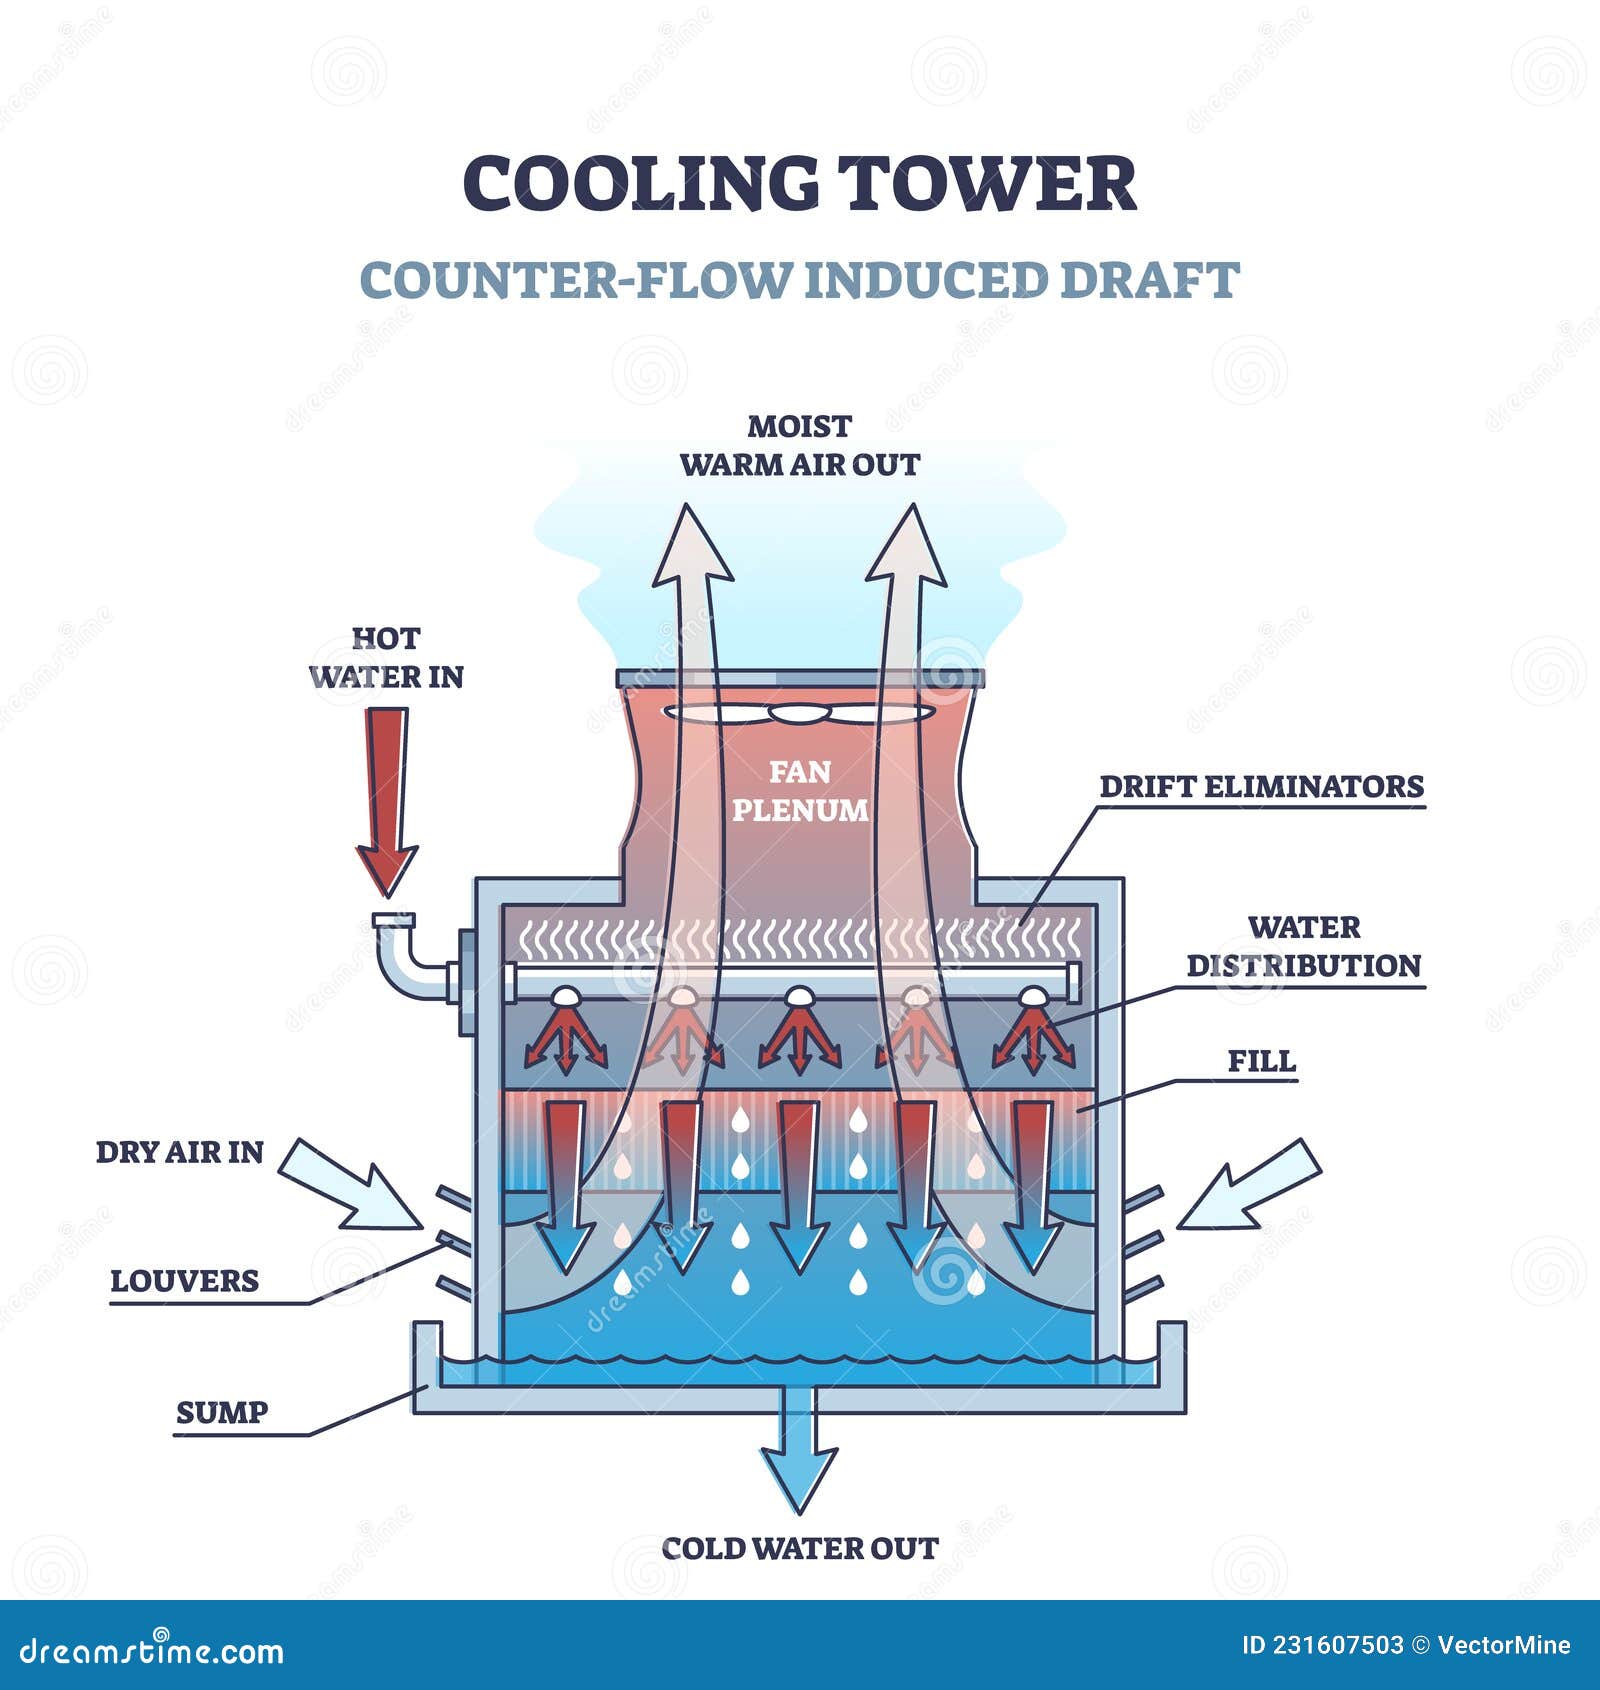 counter flow induced draft principe cooling tower type outline diagram